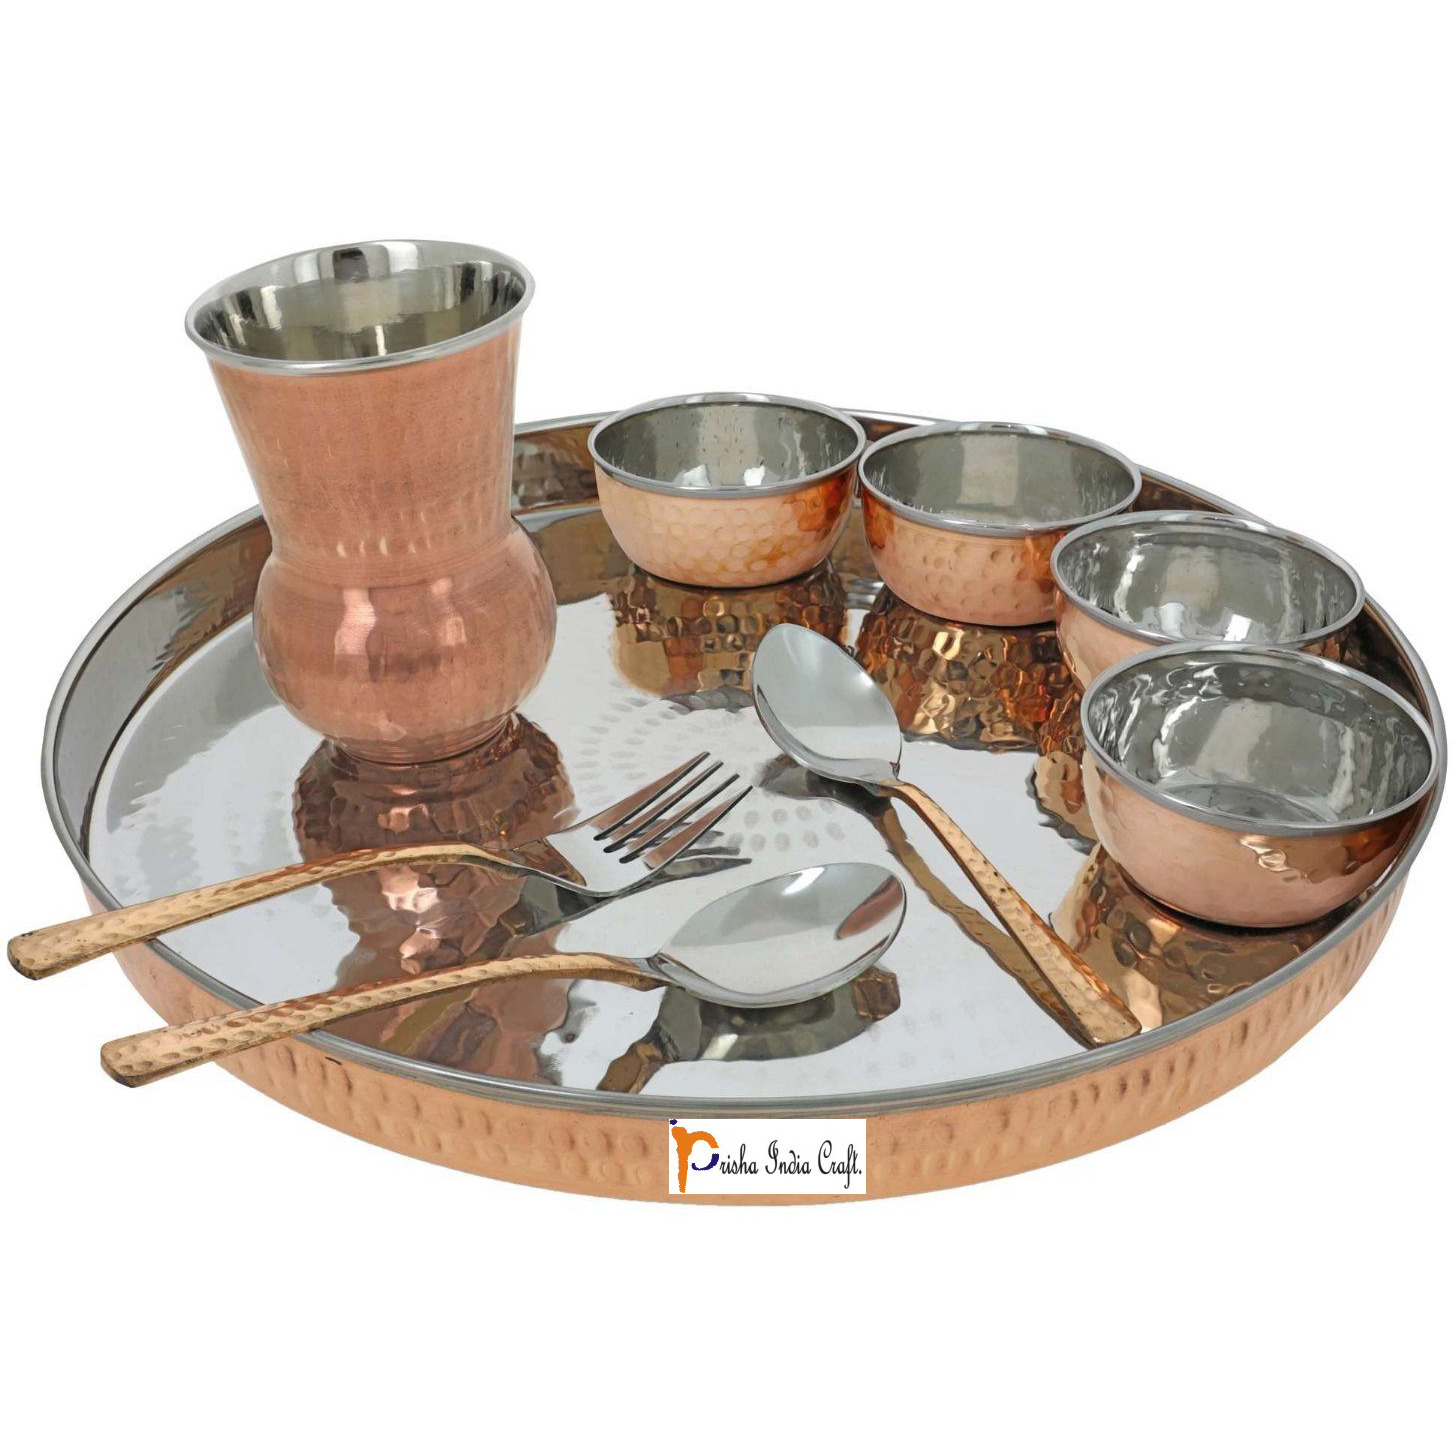 Prisha India Craft B. Set of 4 Dinnerware Traditional Stainless Steel Copper Dinner Set of Thali Plate, Bowls, Glass and Spoons, Dia 13  With 1 Stainless Steel Copper Hammered Pitcher Jug - Christmas Gift